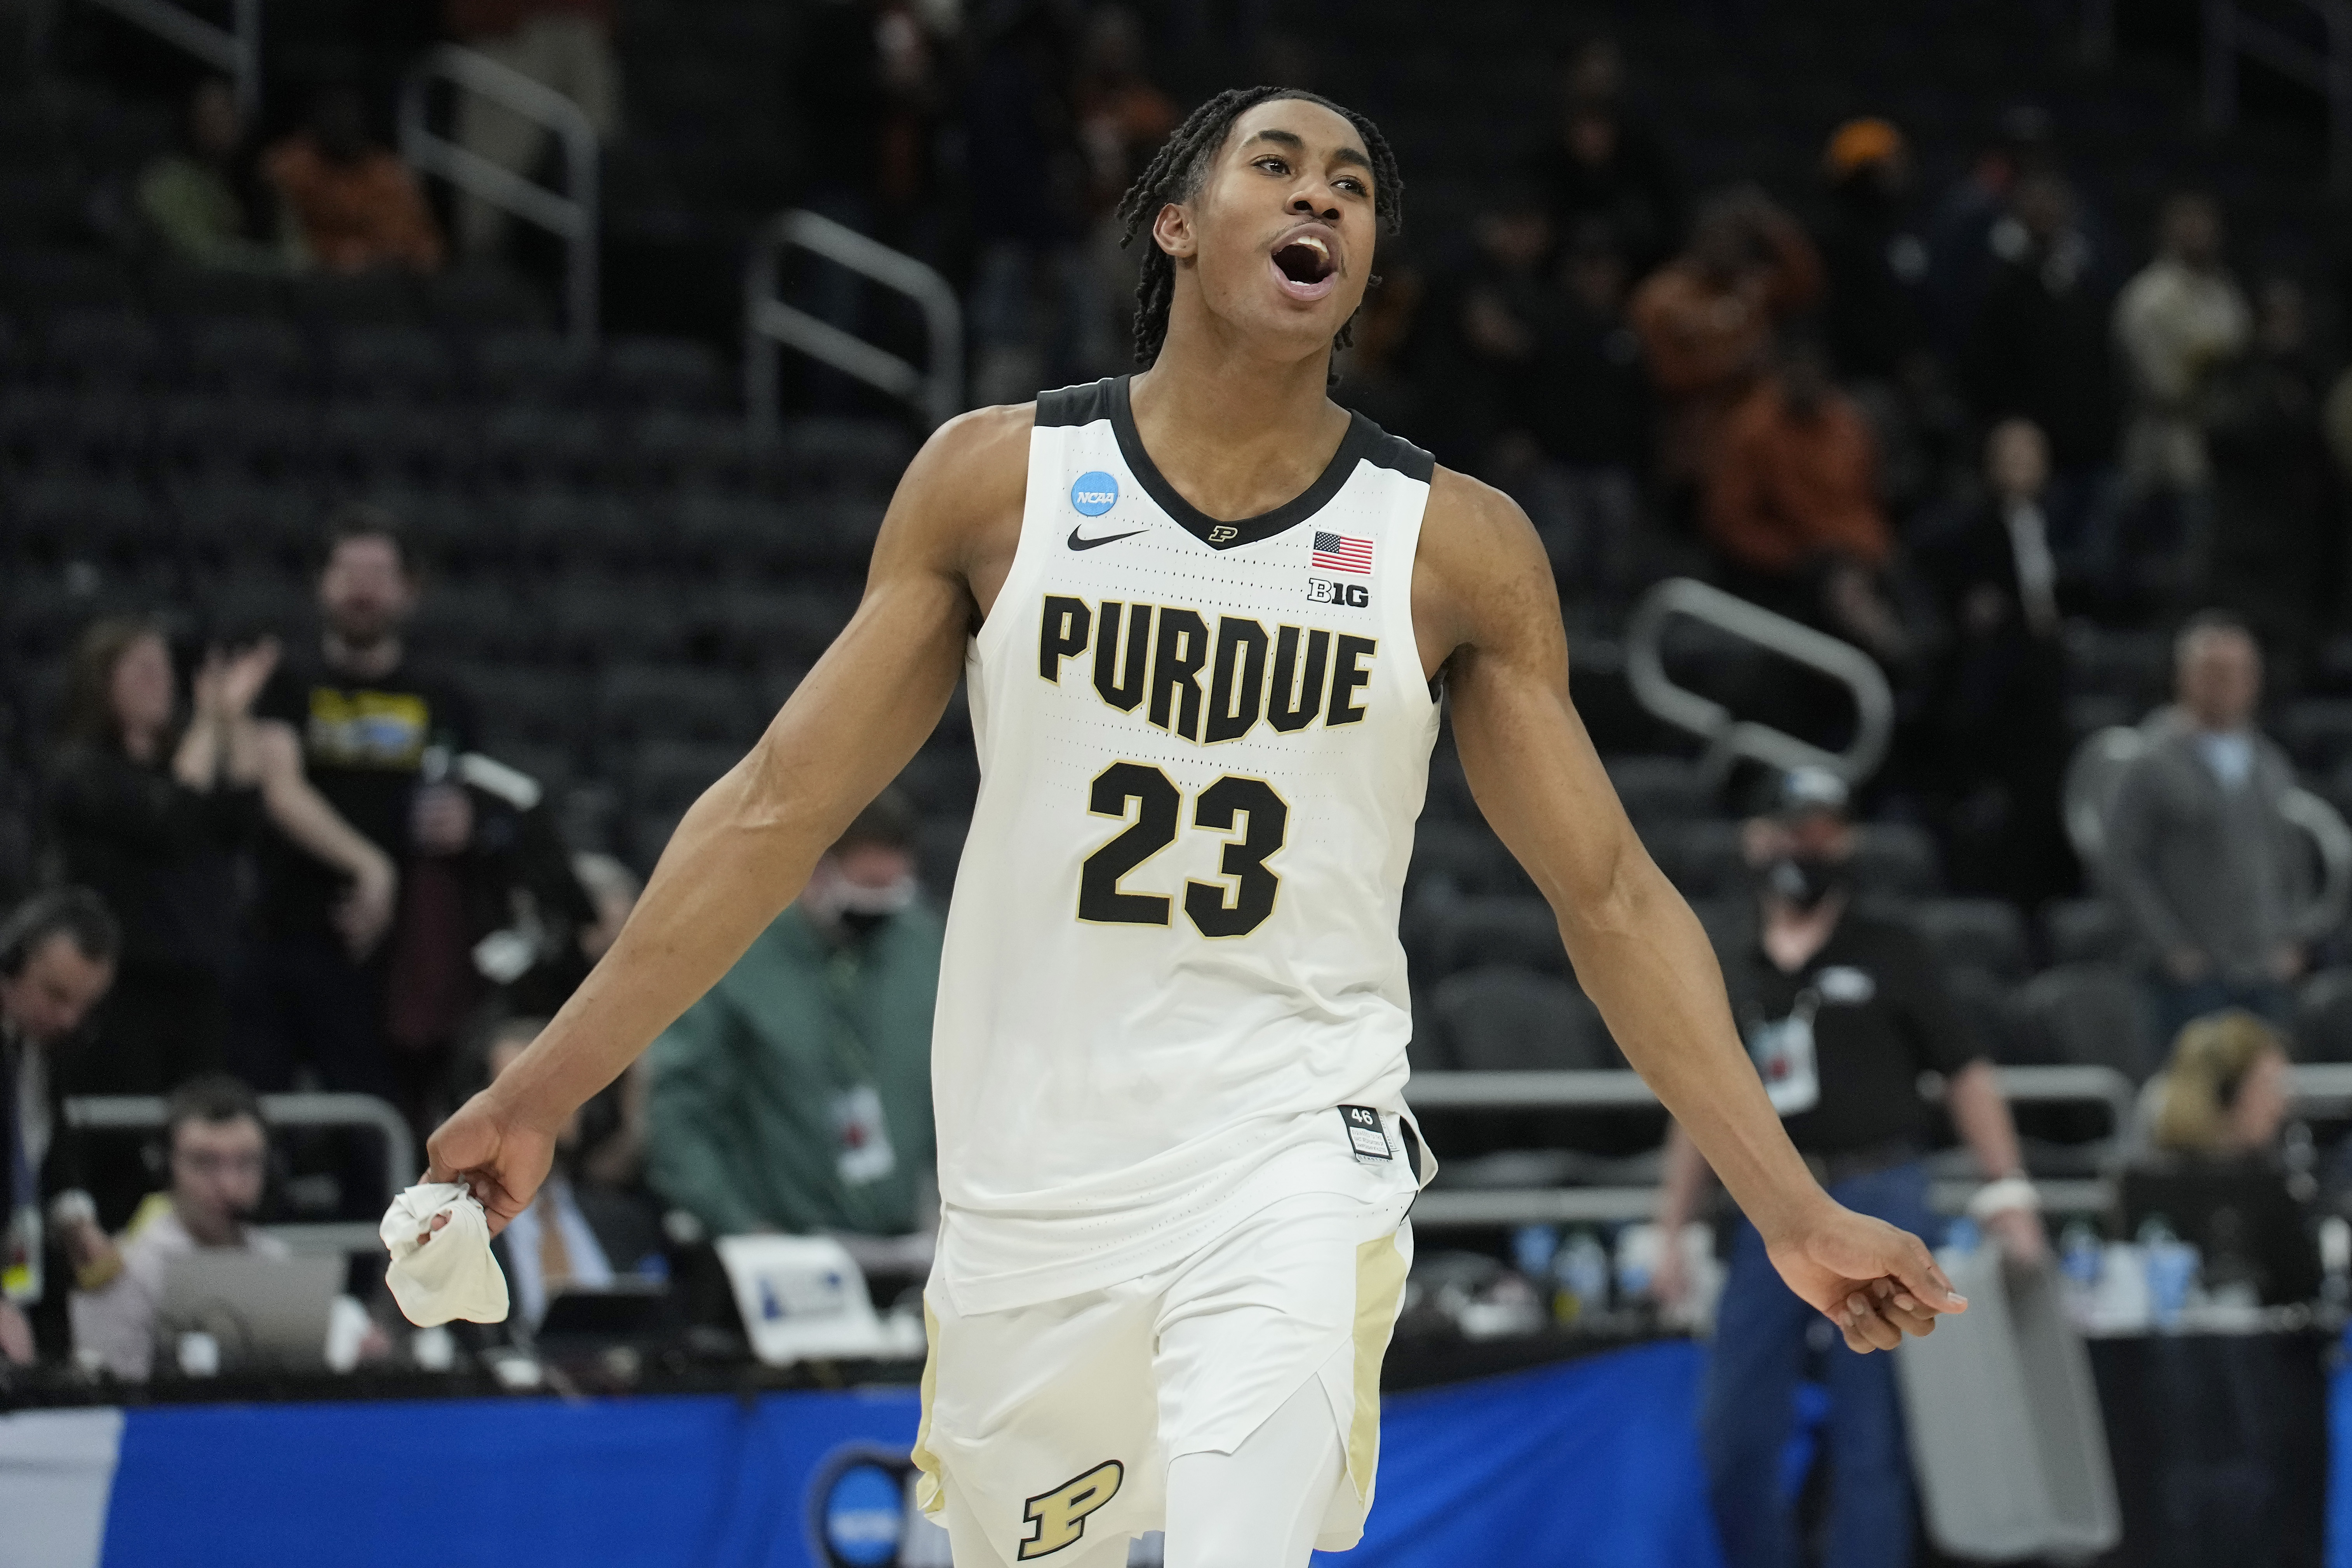 NBA Draft Combine 2022: Paolo Banchero, Chet Holmgren opt out of playing  plus top prospects, rising sleepers to watch